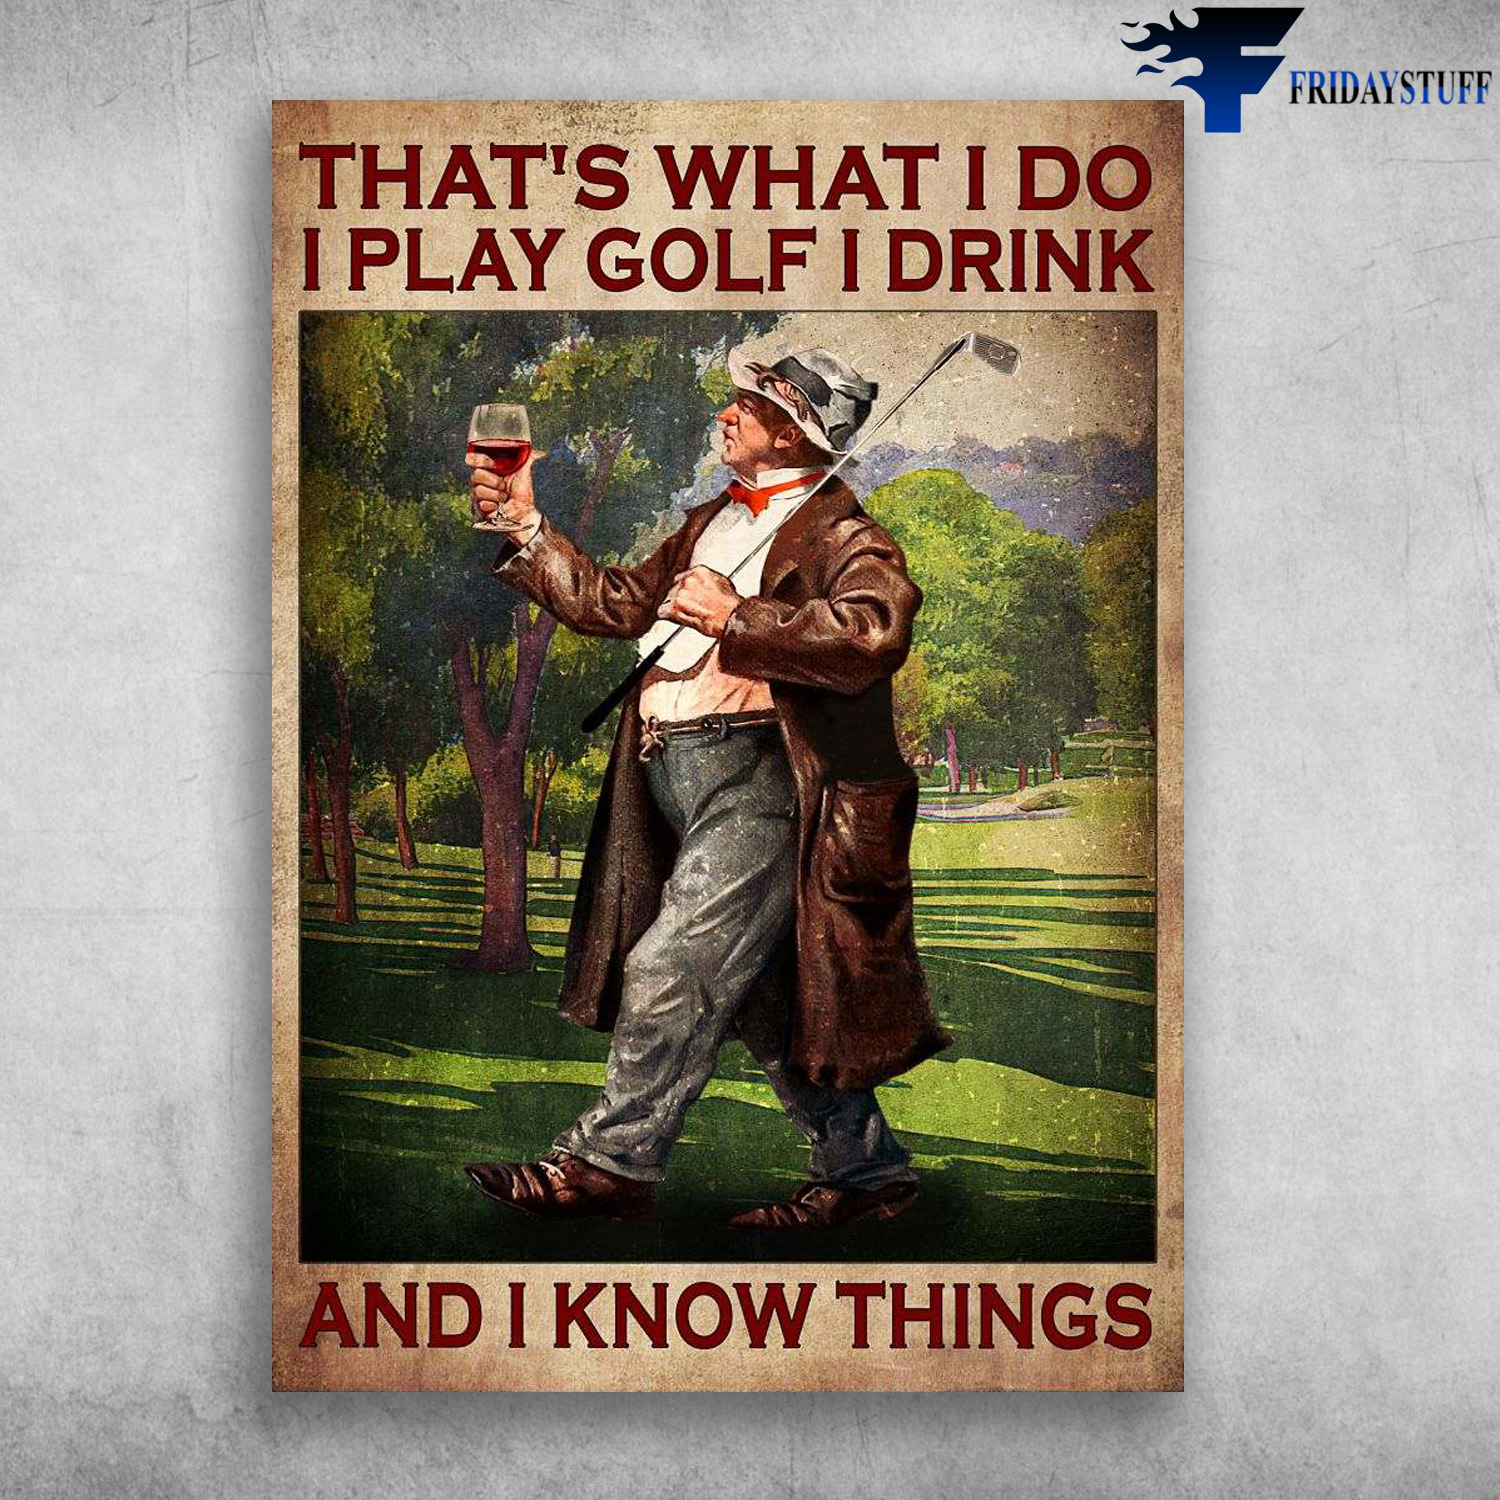 Old Golf Man, Golf And Wine - That's What I Do, I Play Gold, I Drink, And I Know Things